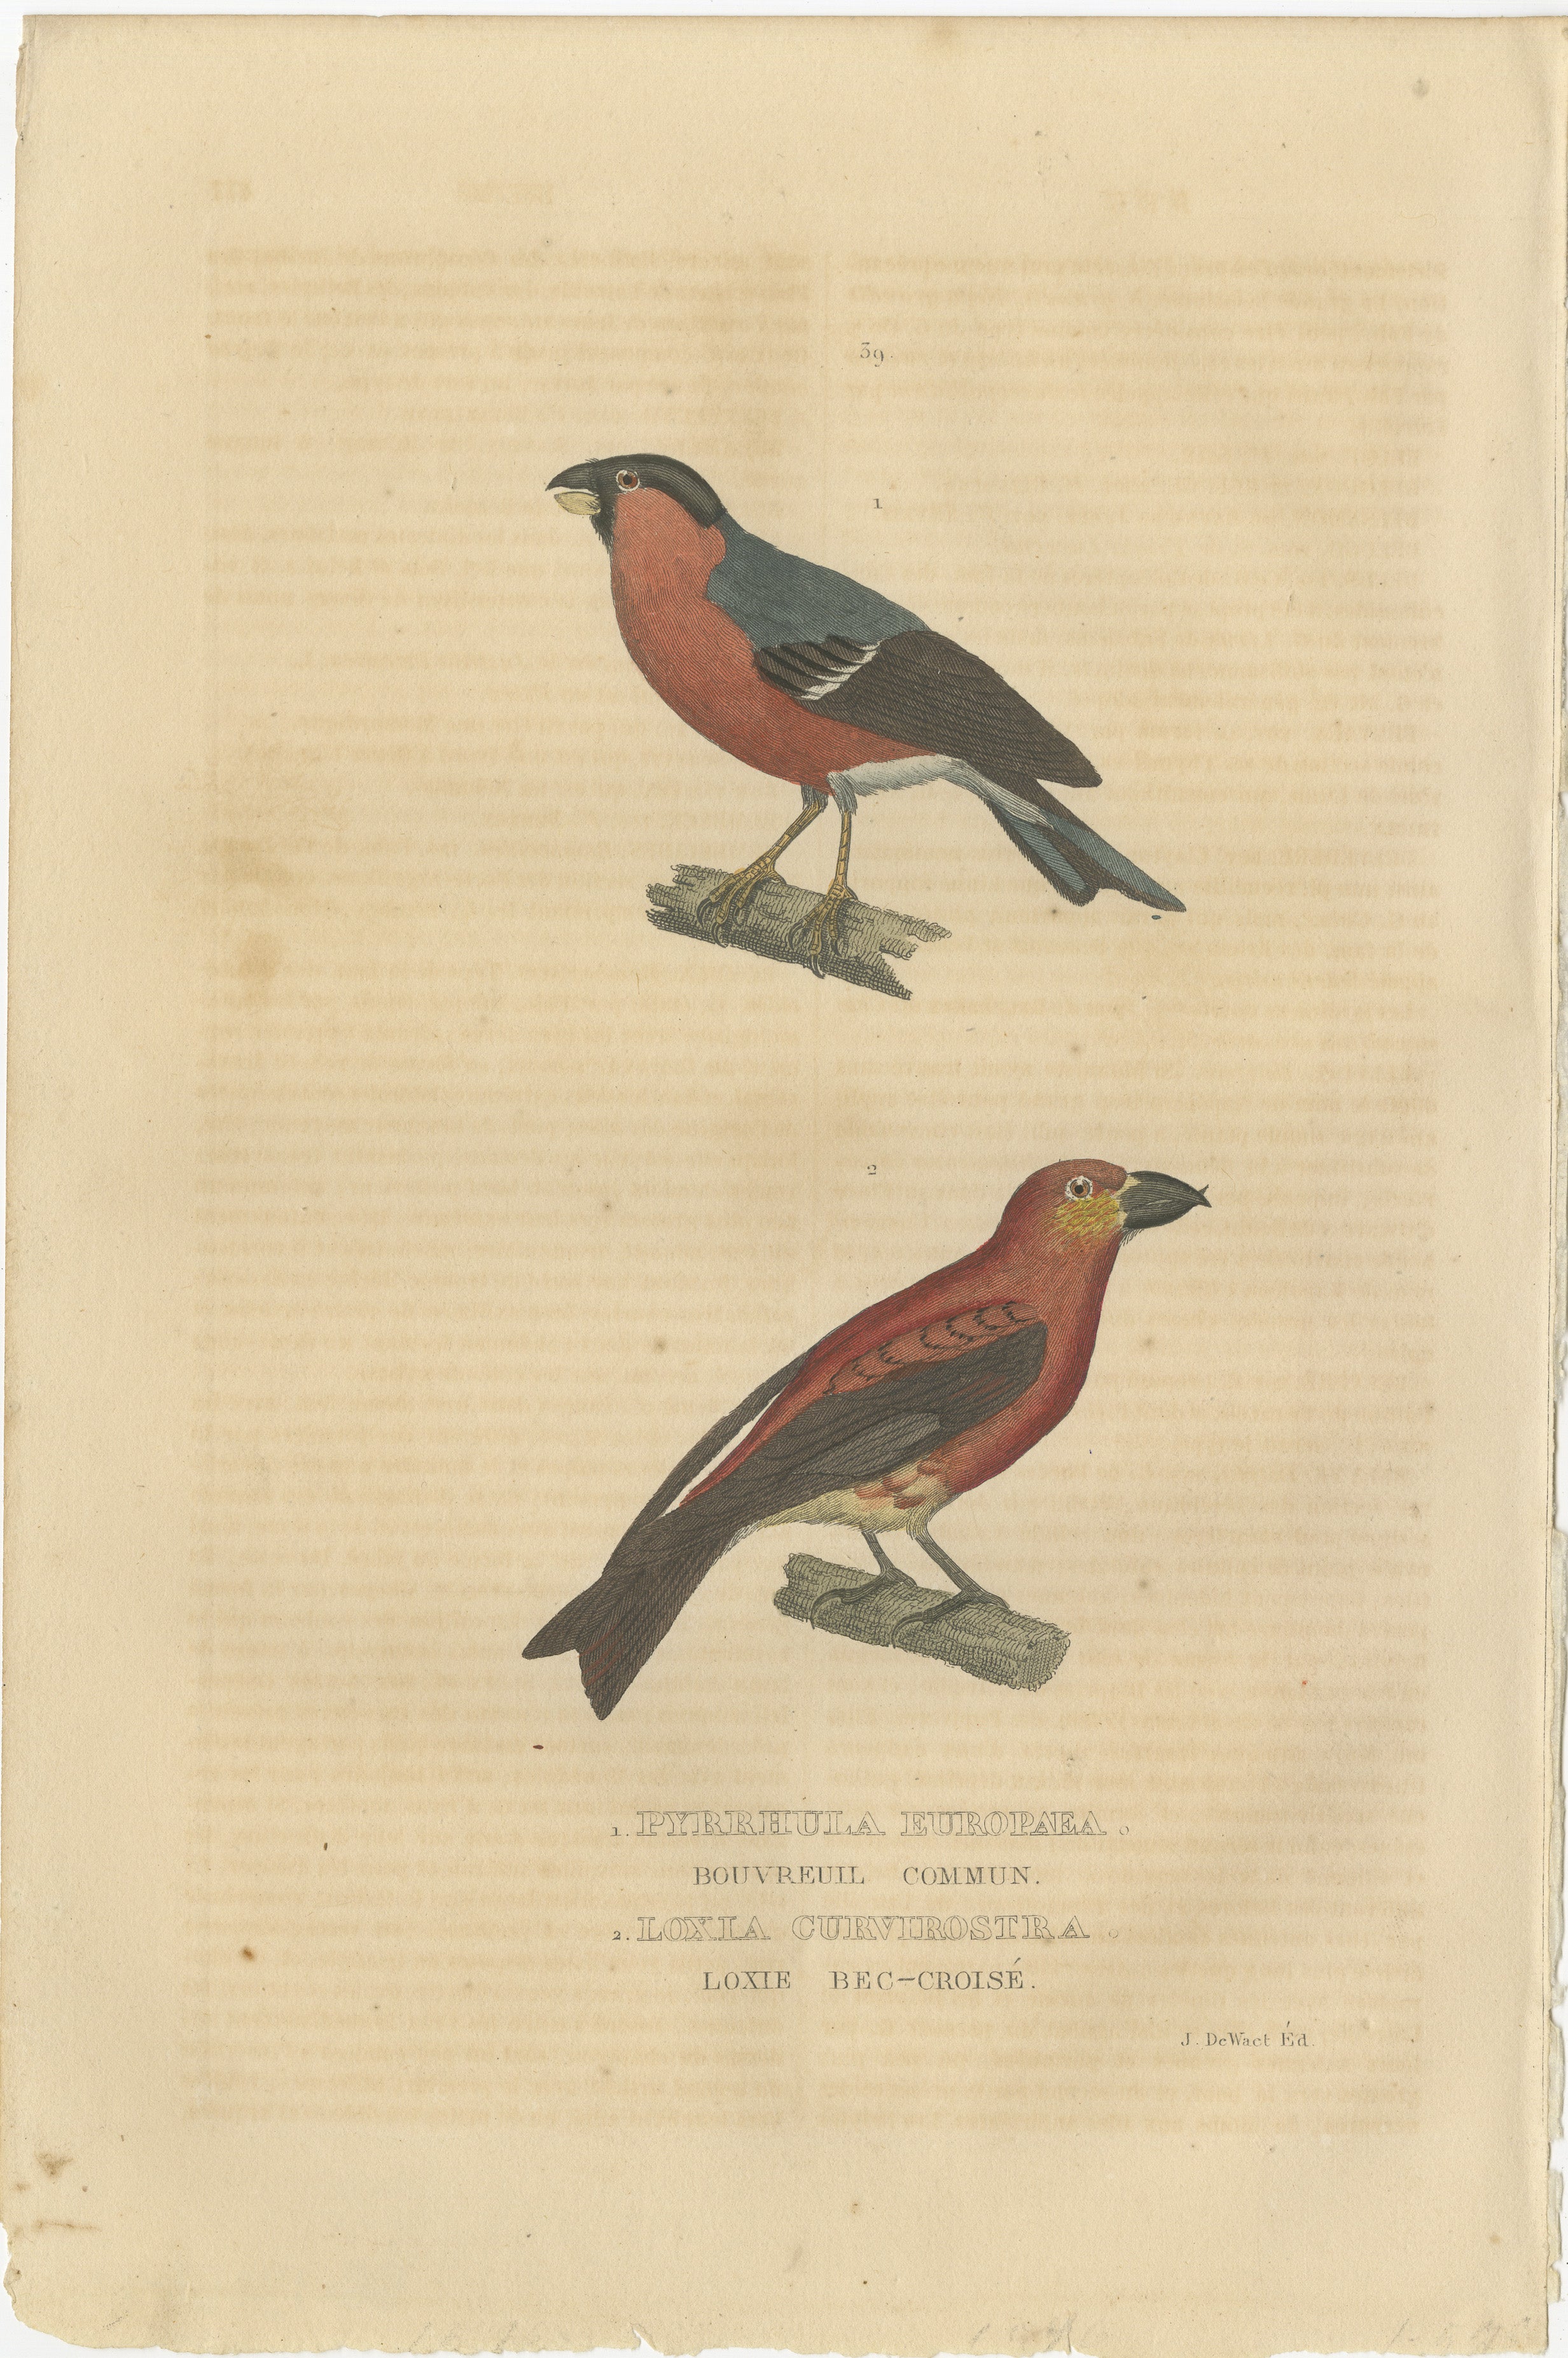 Title: ‘1. CAILLE NATTEE (MALE), 2. PERDRIX ROUGE.’

– Translated: 1. Quail (male), 2. Red-legged Partridge, Partridges and Quails are ground-nesting seed-eaters.

Made by F.J. Desmares after Pierre Auguste Joseph Drapiez (1778-1856).

Engraving